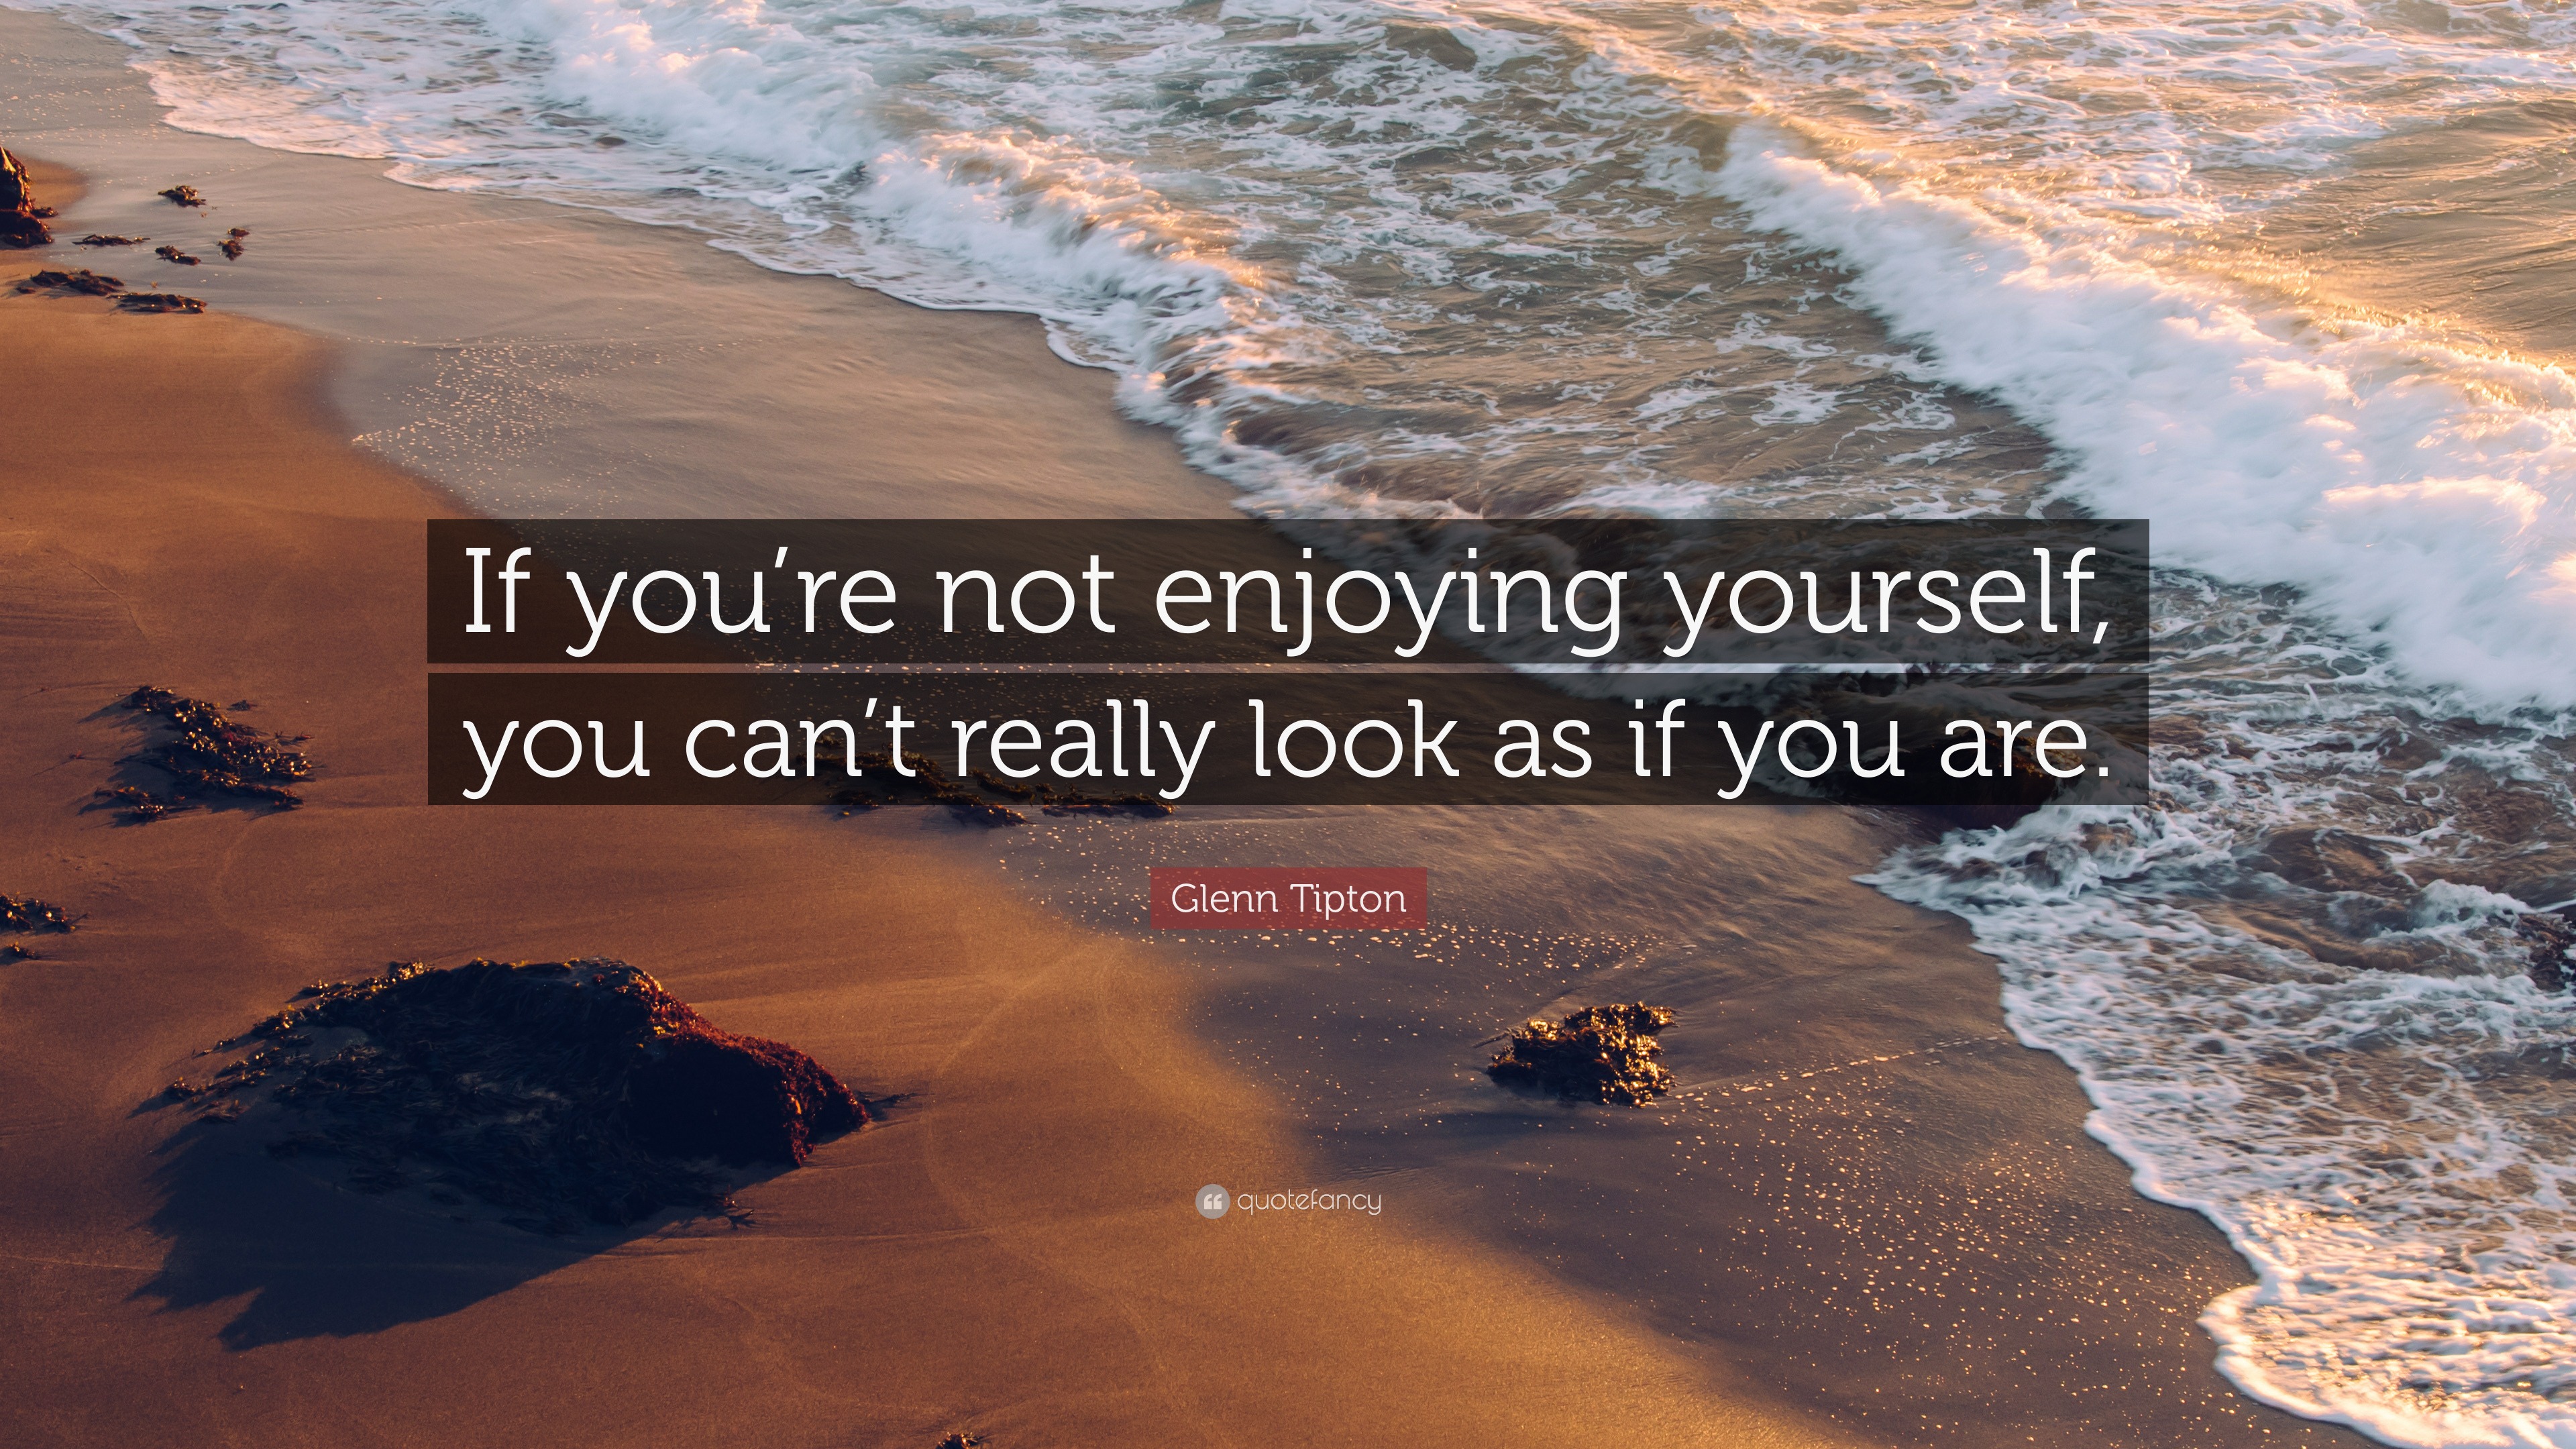 Glenn Tipton Quote: “If you're not enjoying yourself, you can't really look  as if